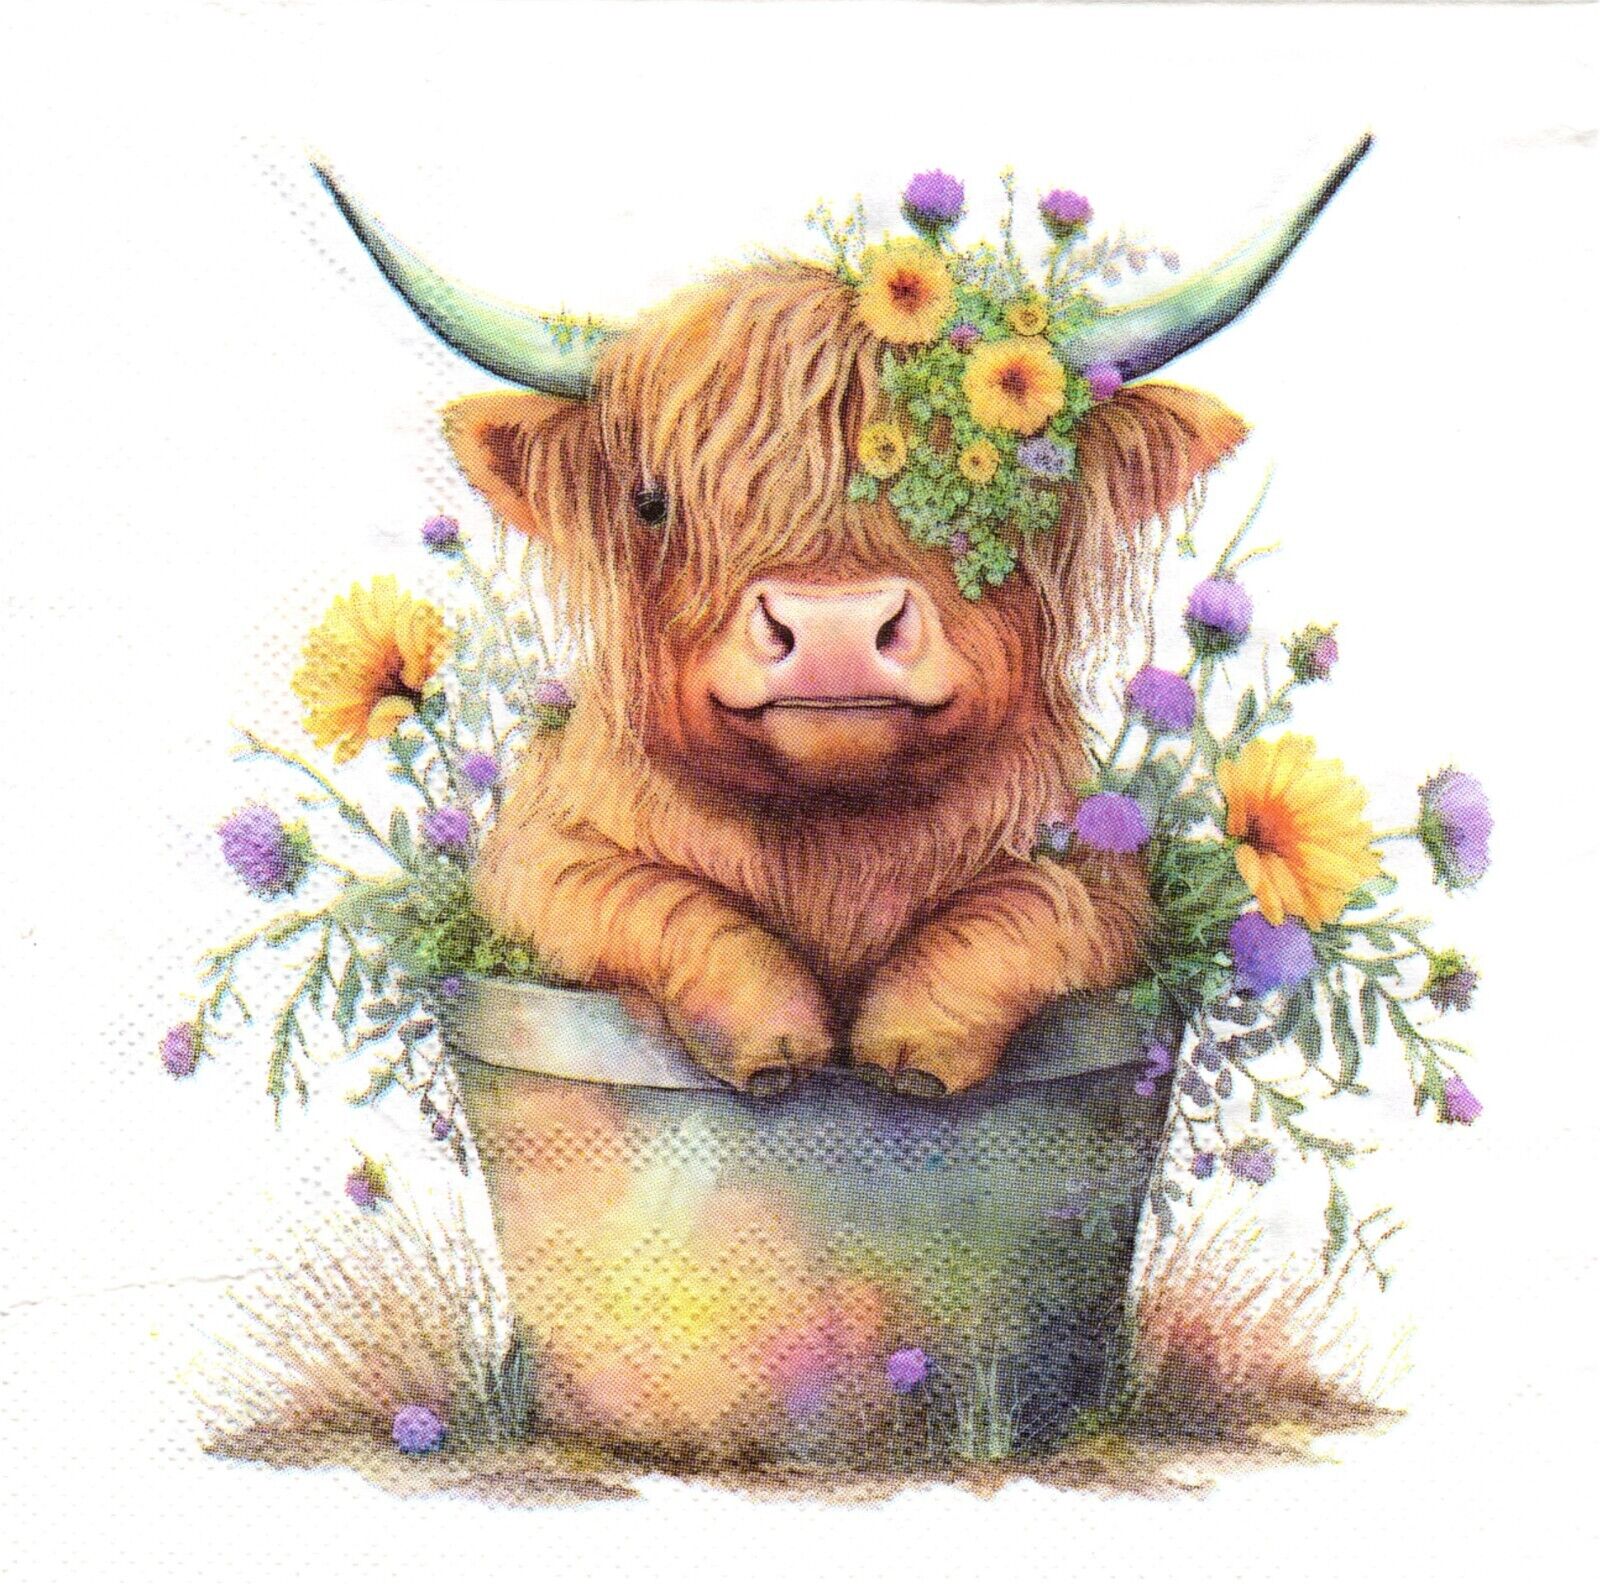 (2) Two Paper Lunch Napkins for Decoupage/Mixed Media - Cute Highland Cow